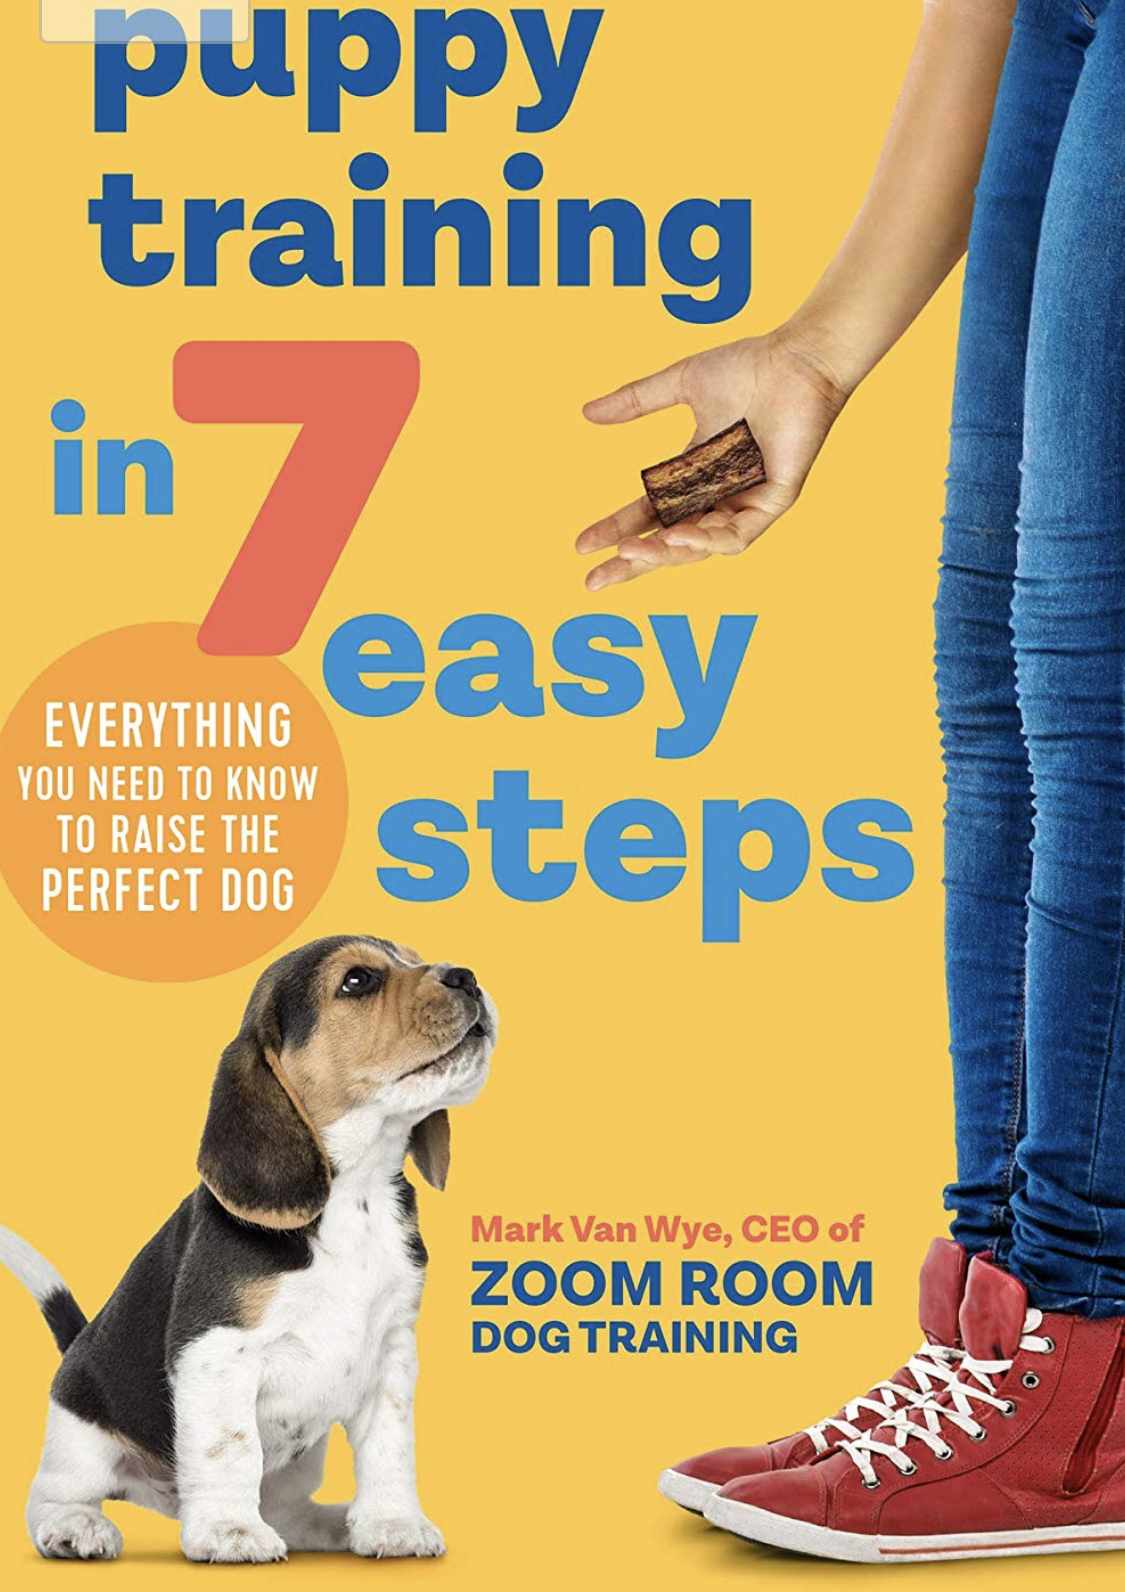 photo of a beagle staring at the treat in the hand of a woman standing in front of him and with text - puppy training in 7 easy steps